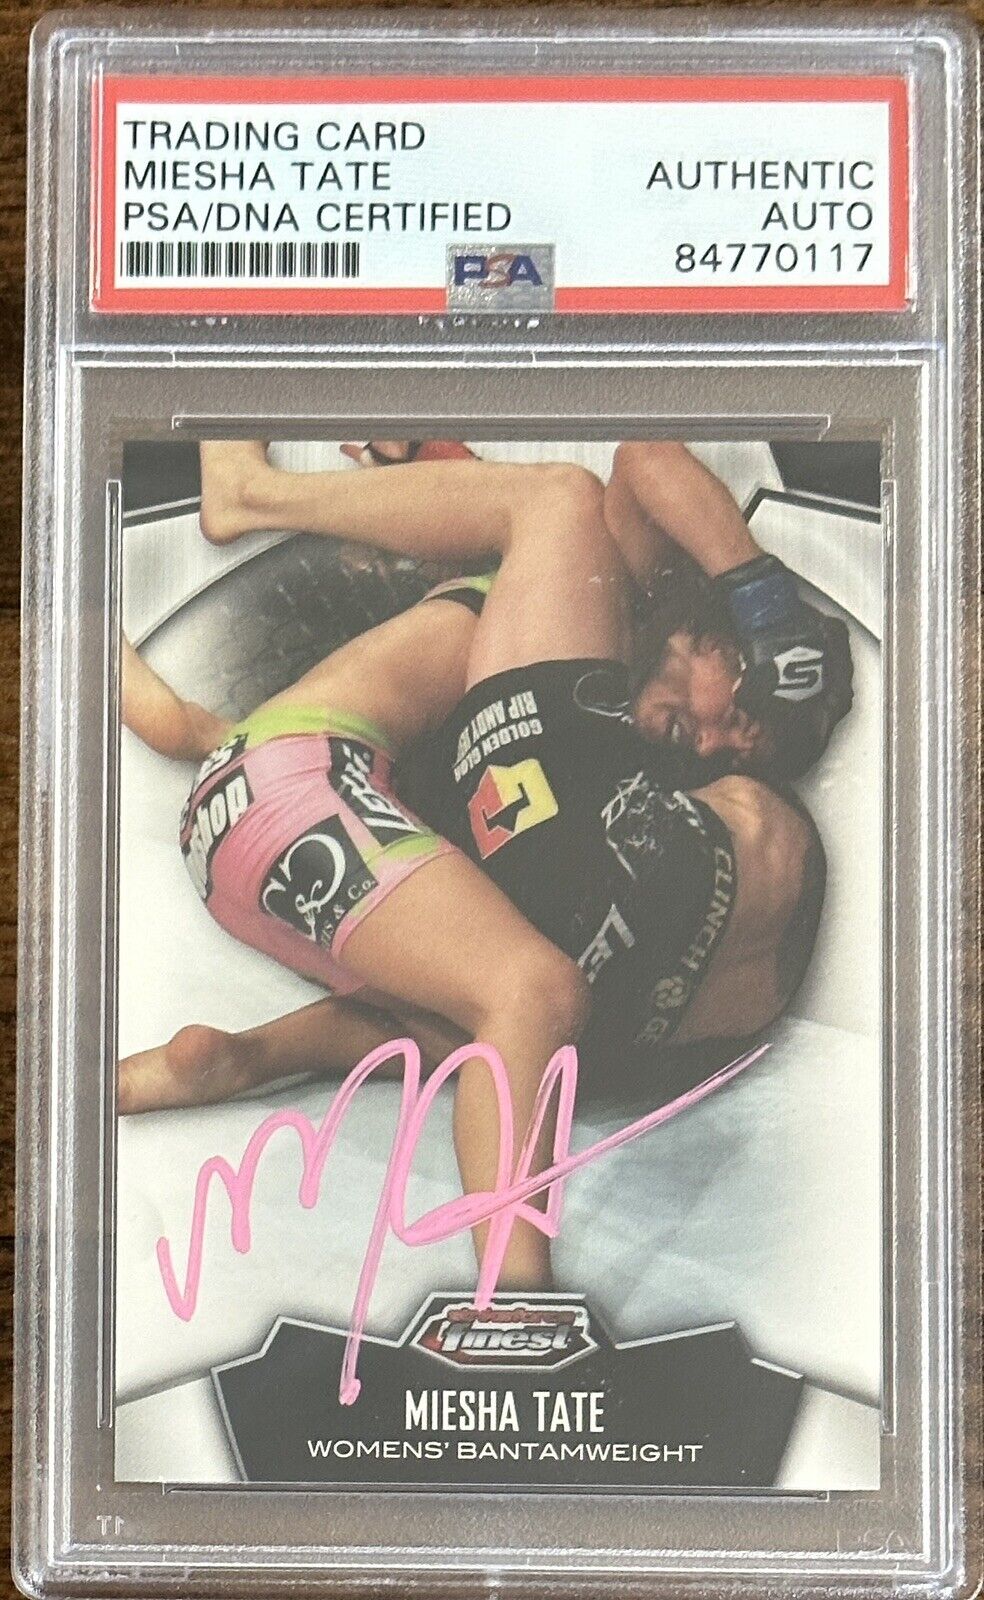 2012 TOPPS FINEST UFC MEISHA TATE CARD PSA DNA CERTIFIED SIGNED AUTOGRAPH